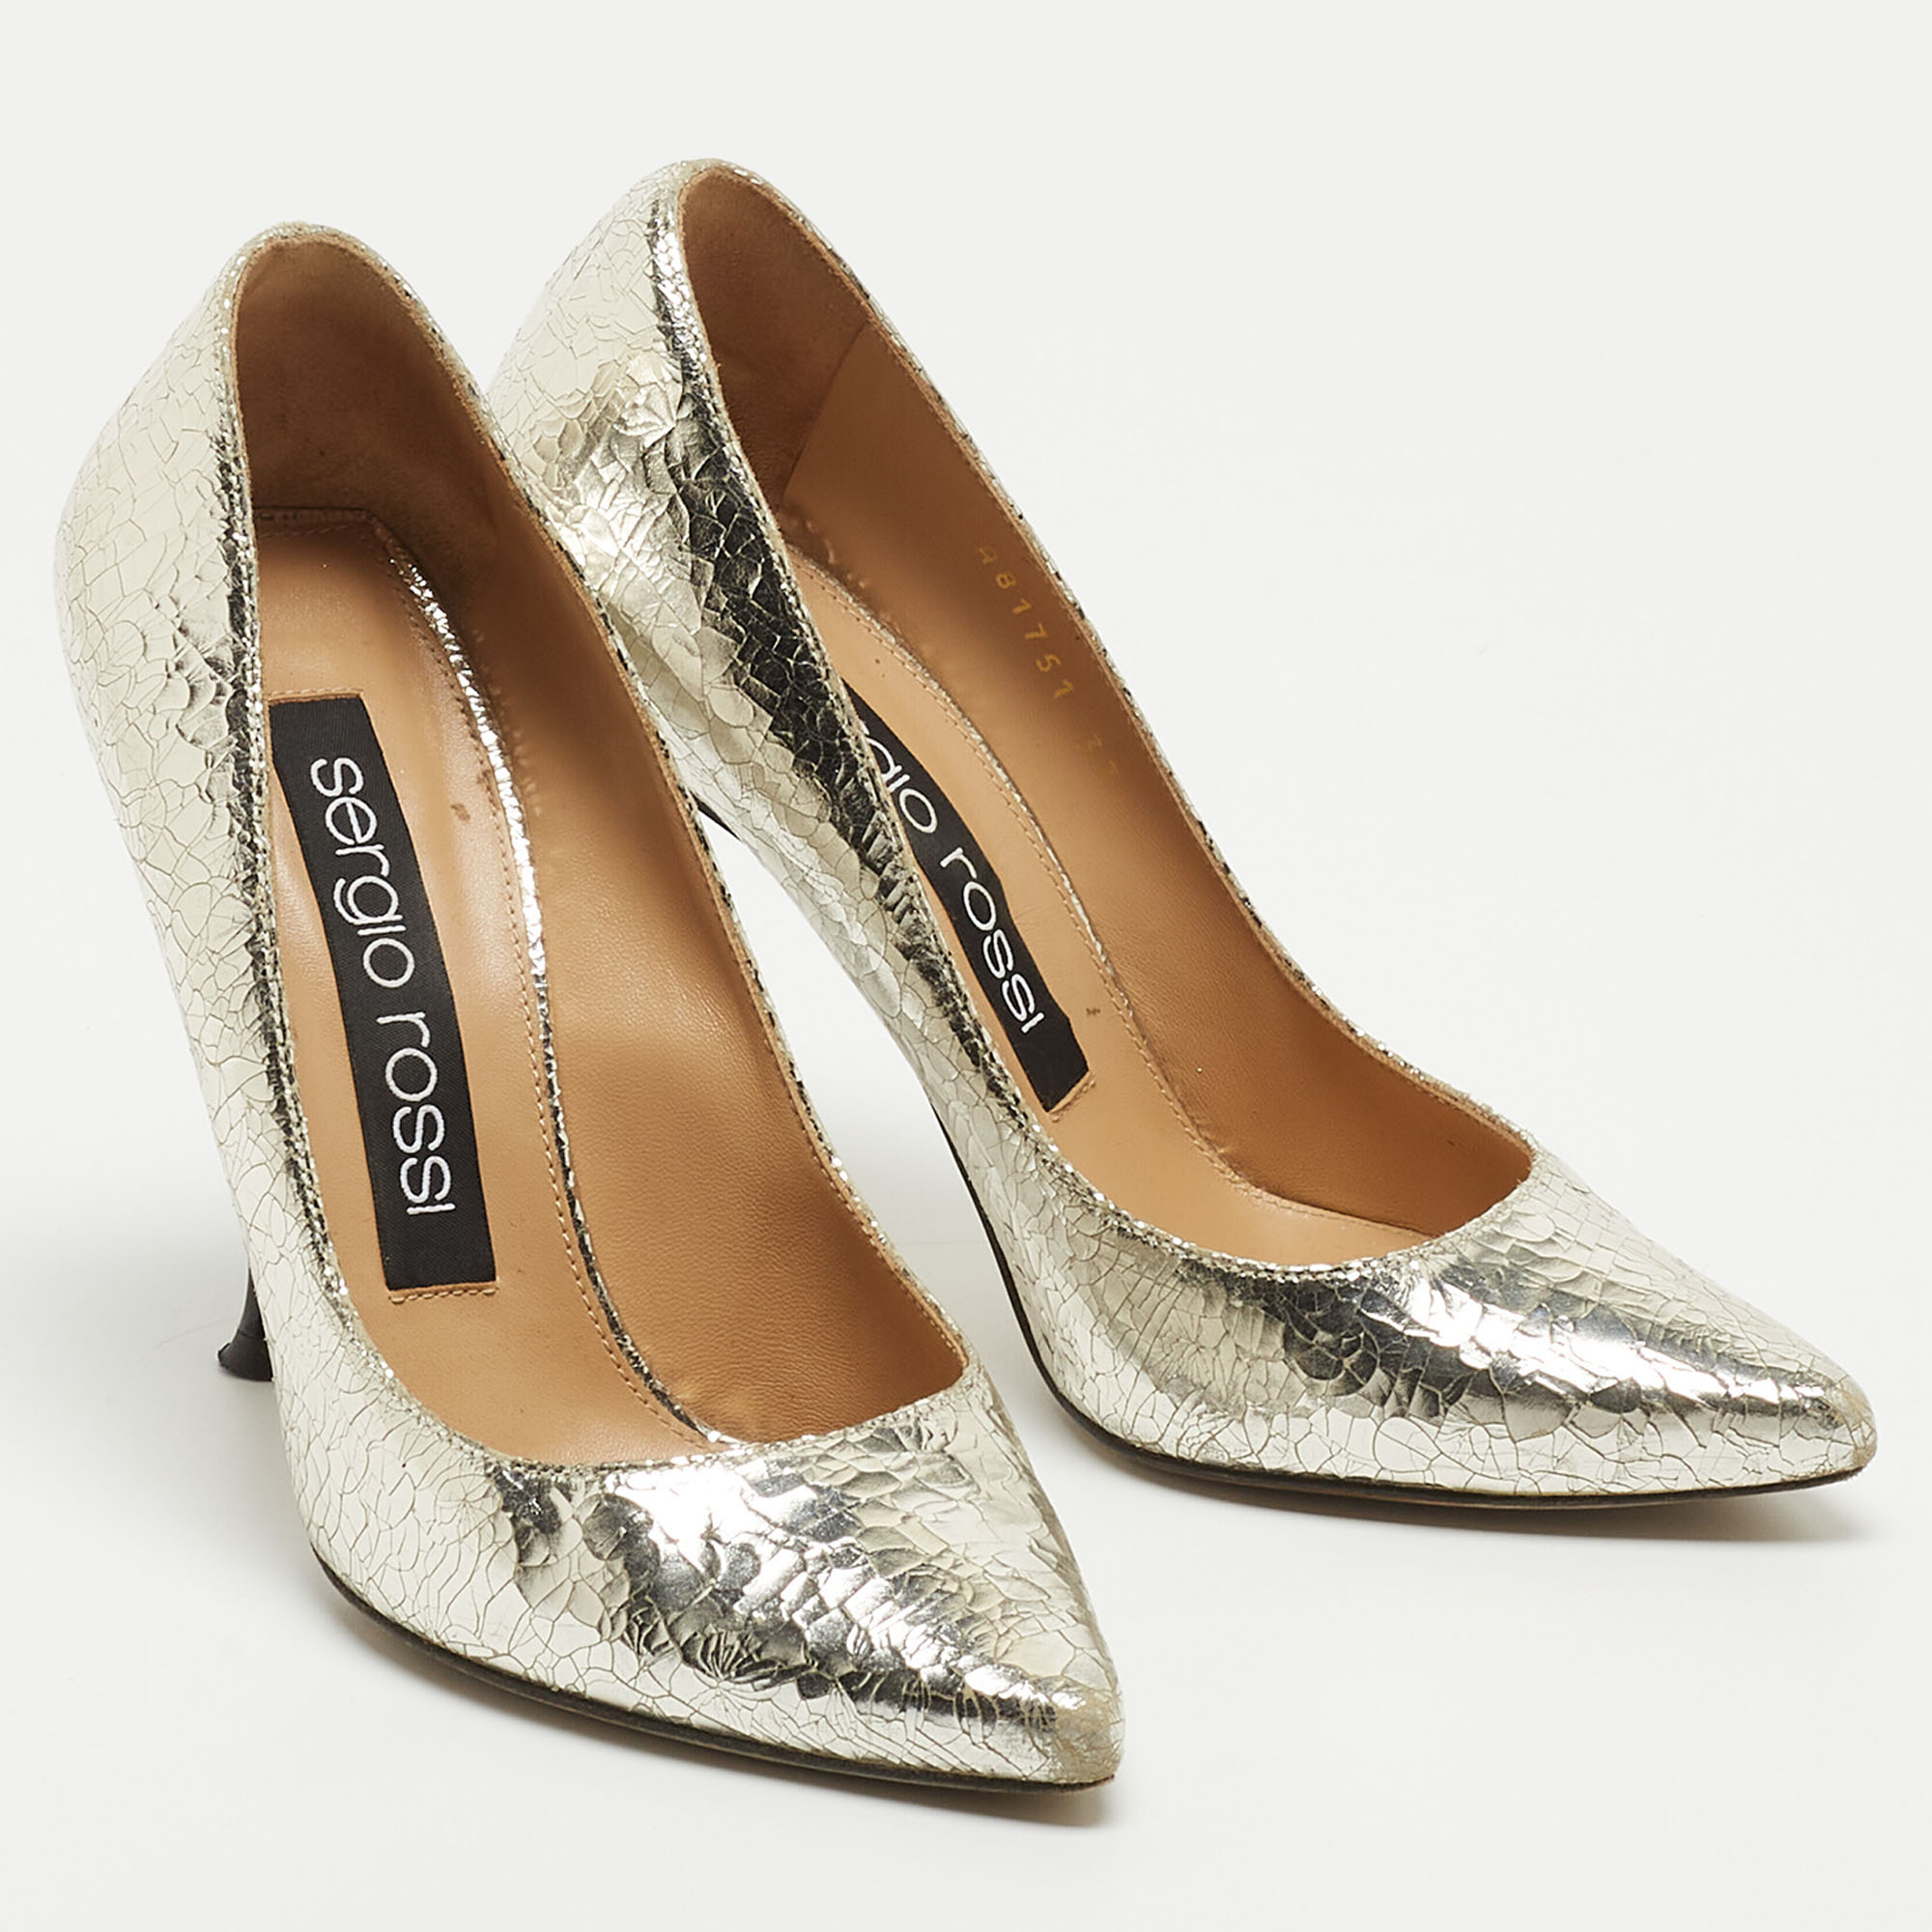 Sergio Rossi Silver Textured Leather Pointed Toe Pumps Size 37